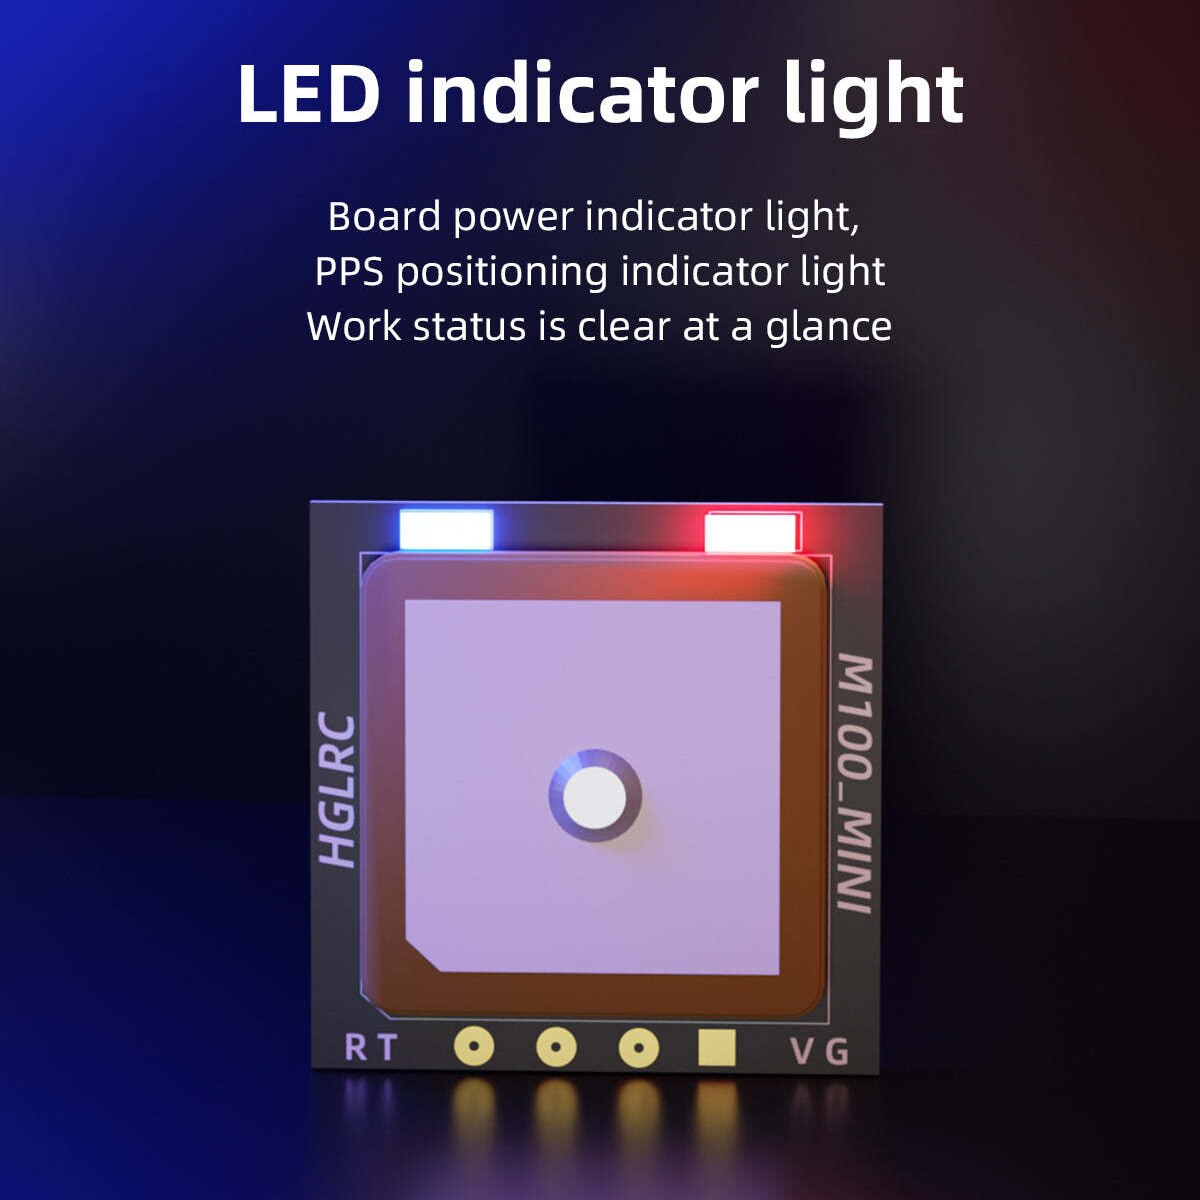 LED indicator light Board power indicator light, PPS positioning indicator light Work status is clear at 